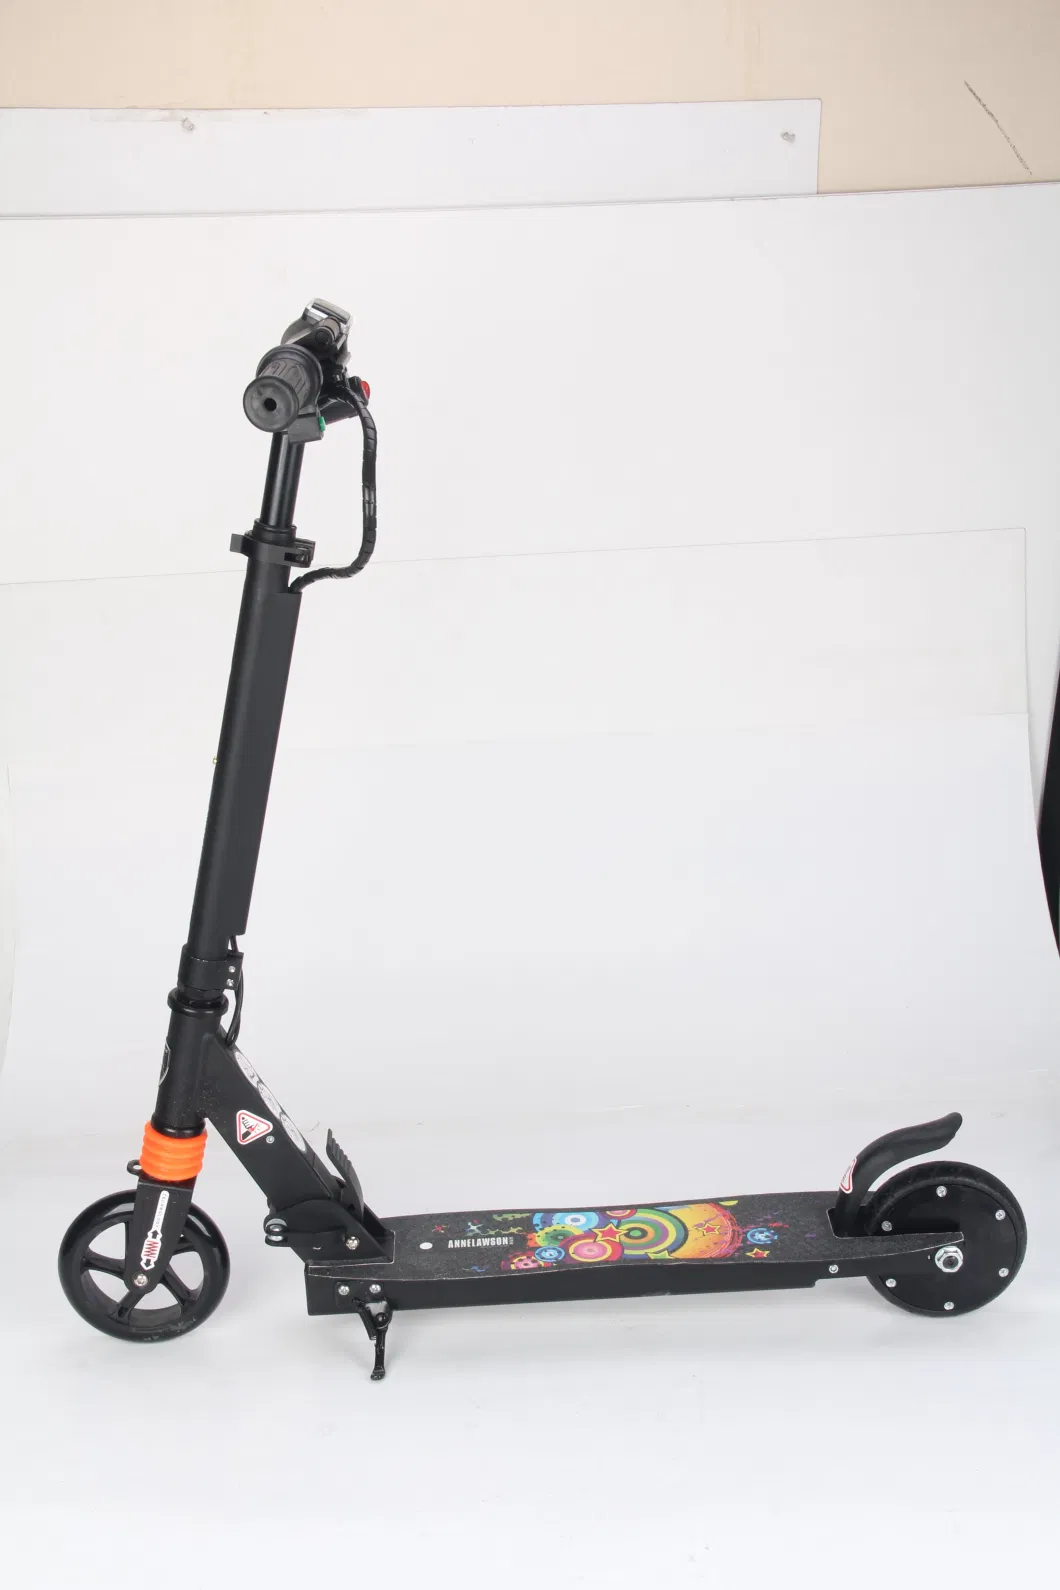 New Design 180W 22V Foldable 2 Wheel Kids Electric Kick Scooter Escooter